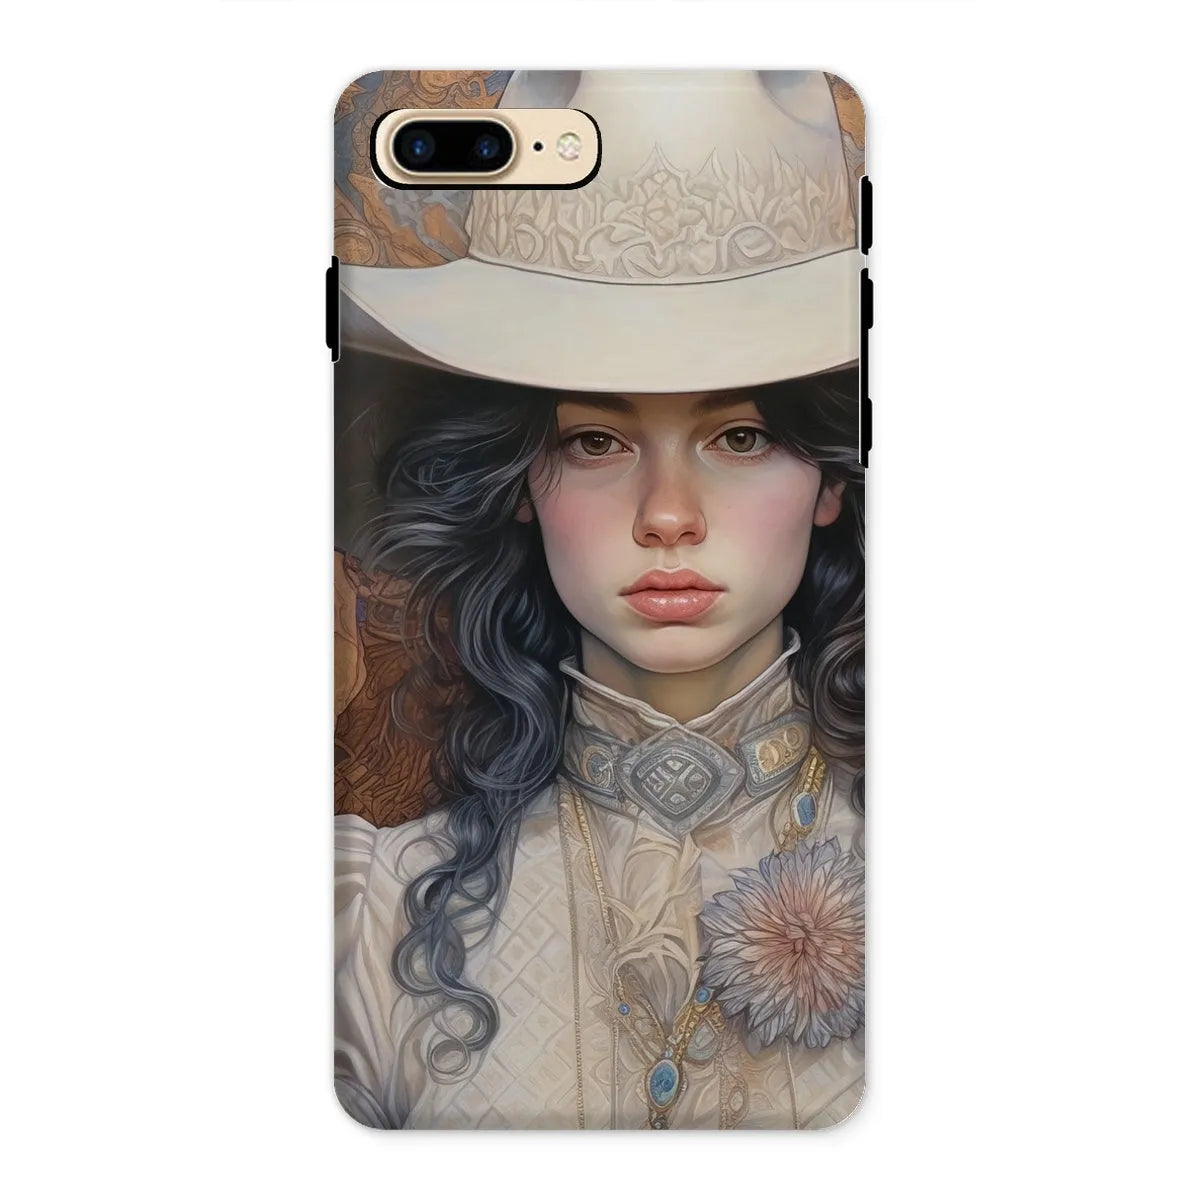 Helena The Lesbian Cowgirl - Sapphic Art Phone Case - Iphone 8 Plus / Matte - Mobile Phone Cases - Aesthetic Art